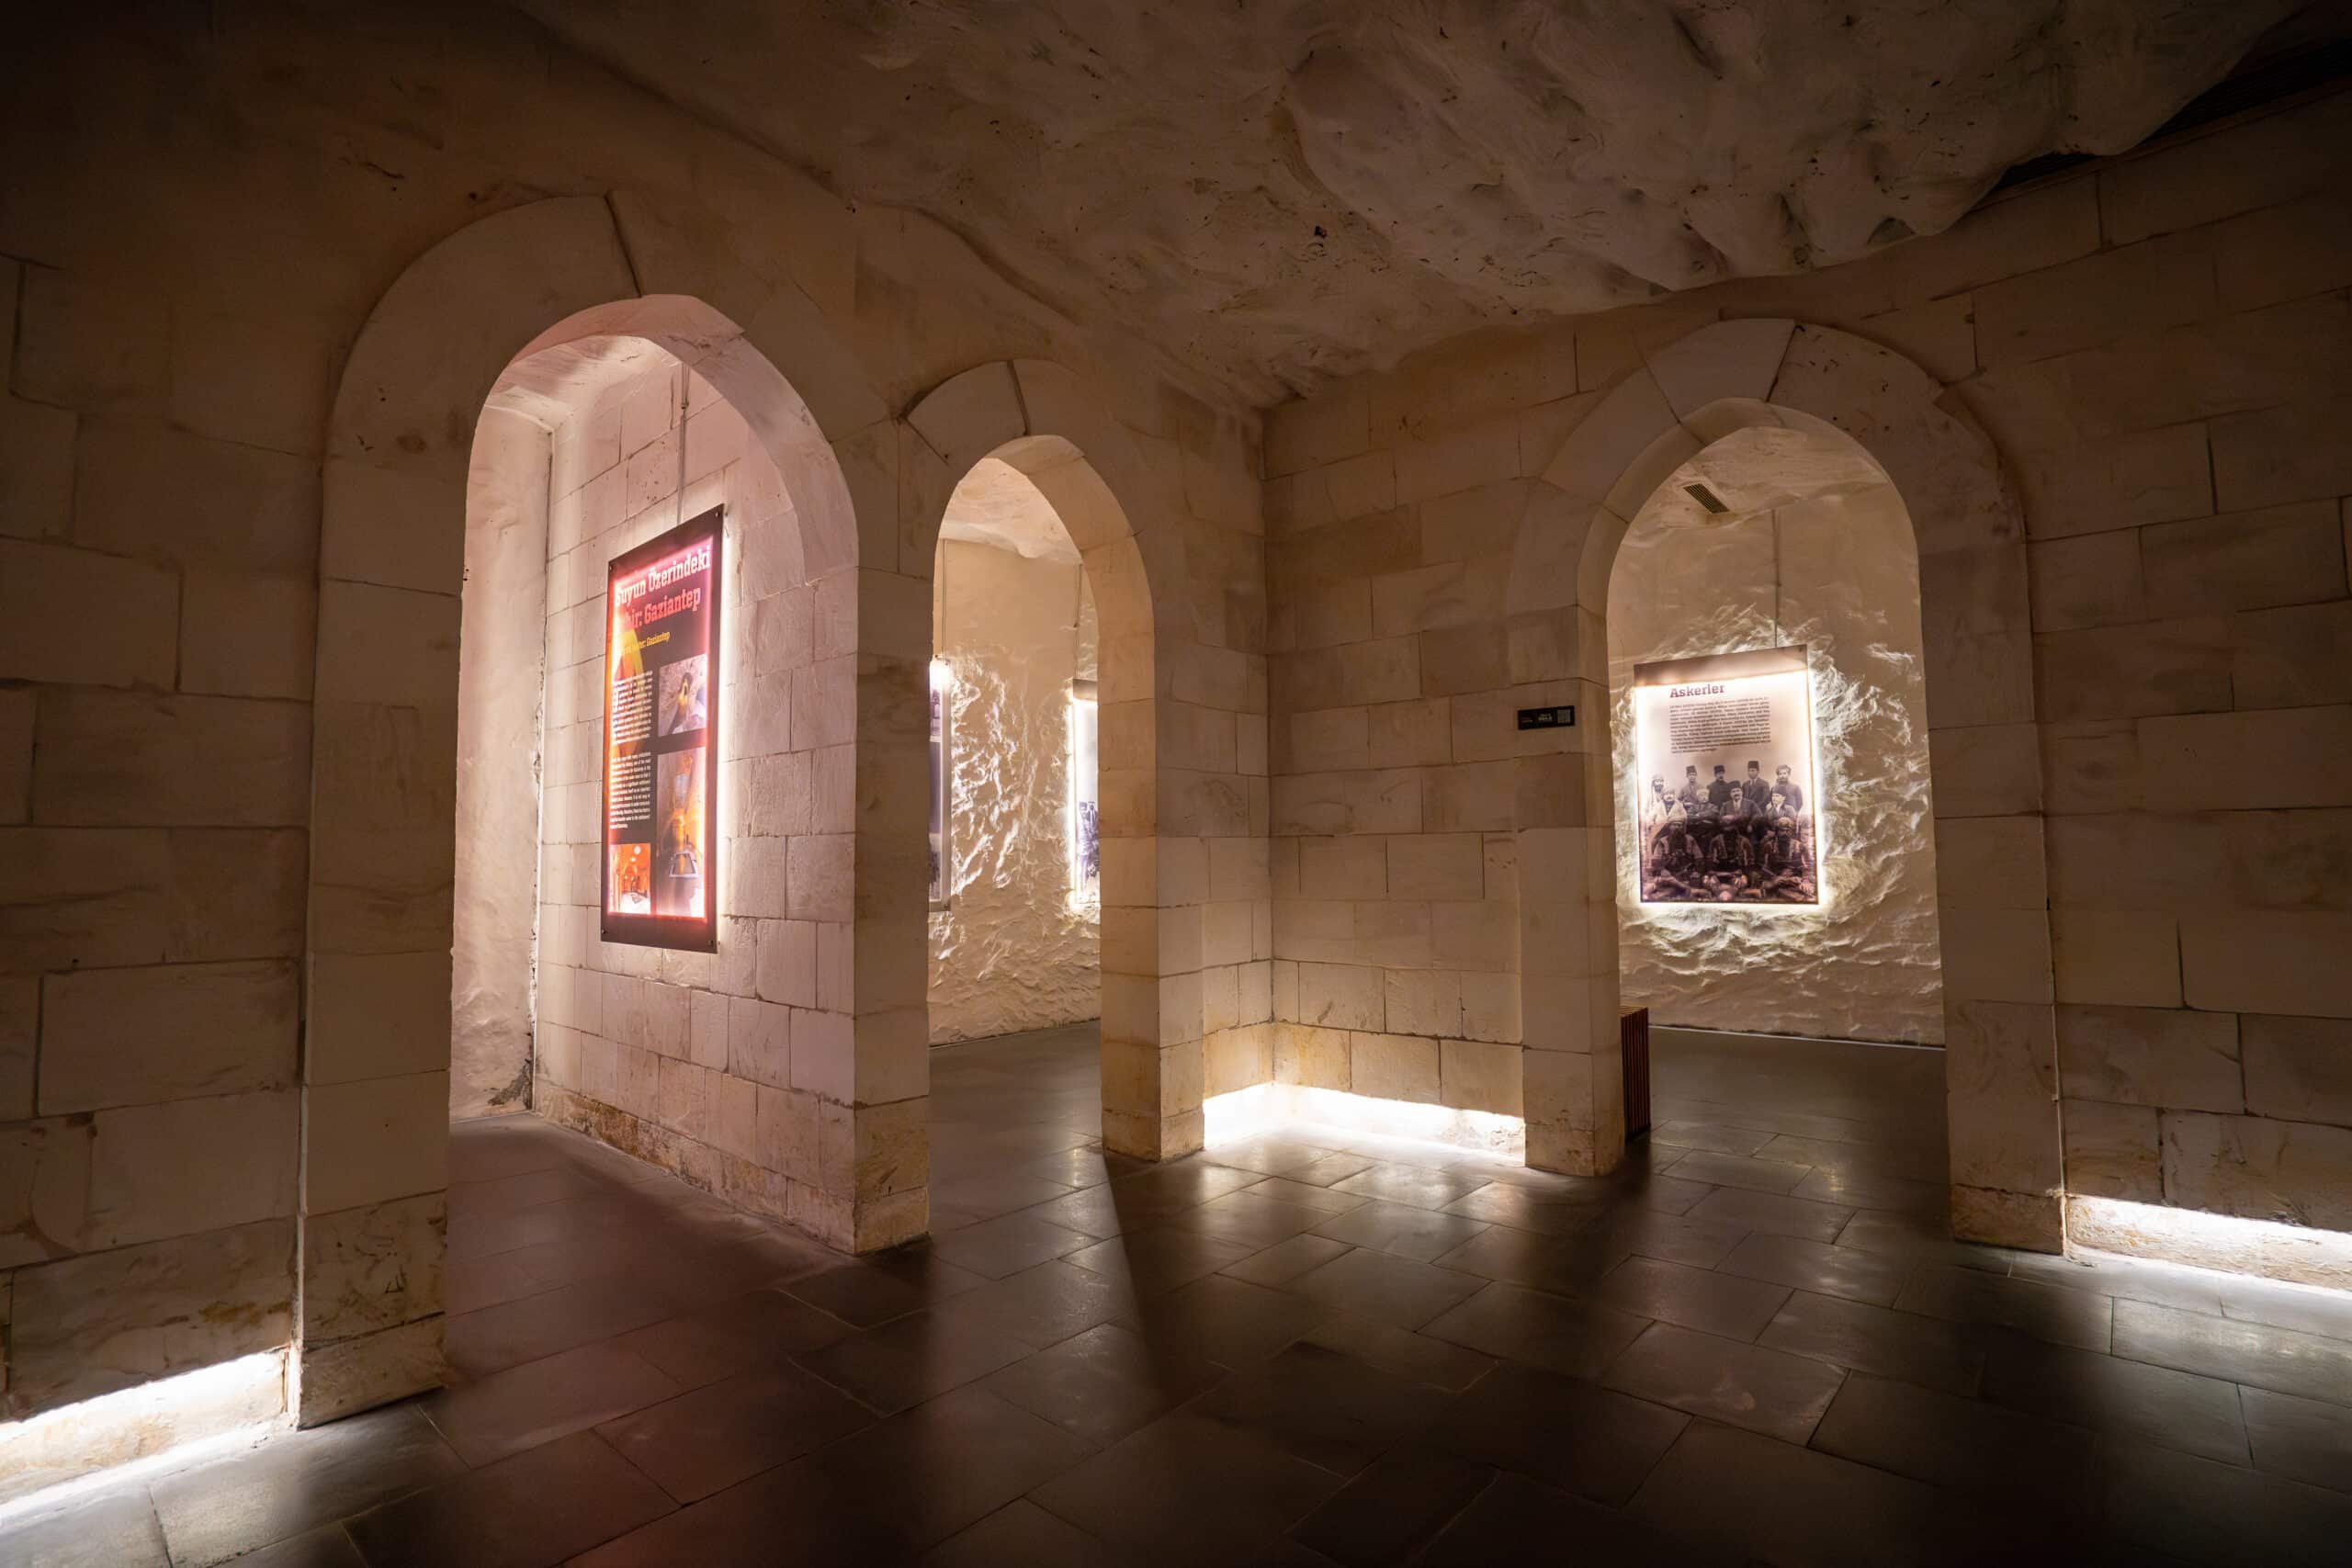 Is Gaziantep worth visiting? A hallway with arches and lights in a cave is a unique sight to see.